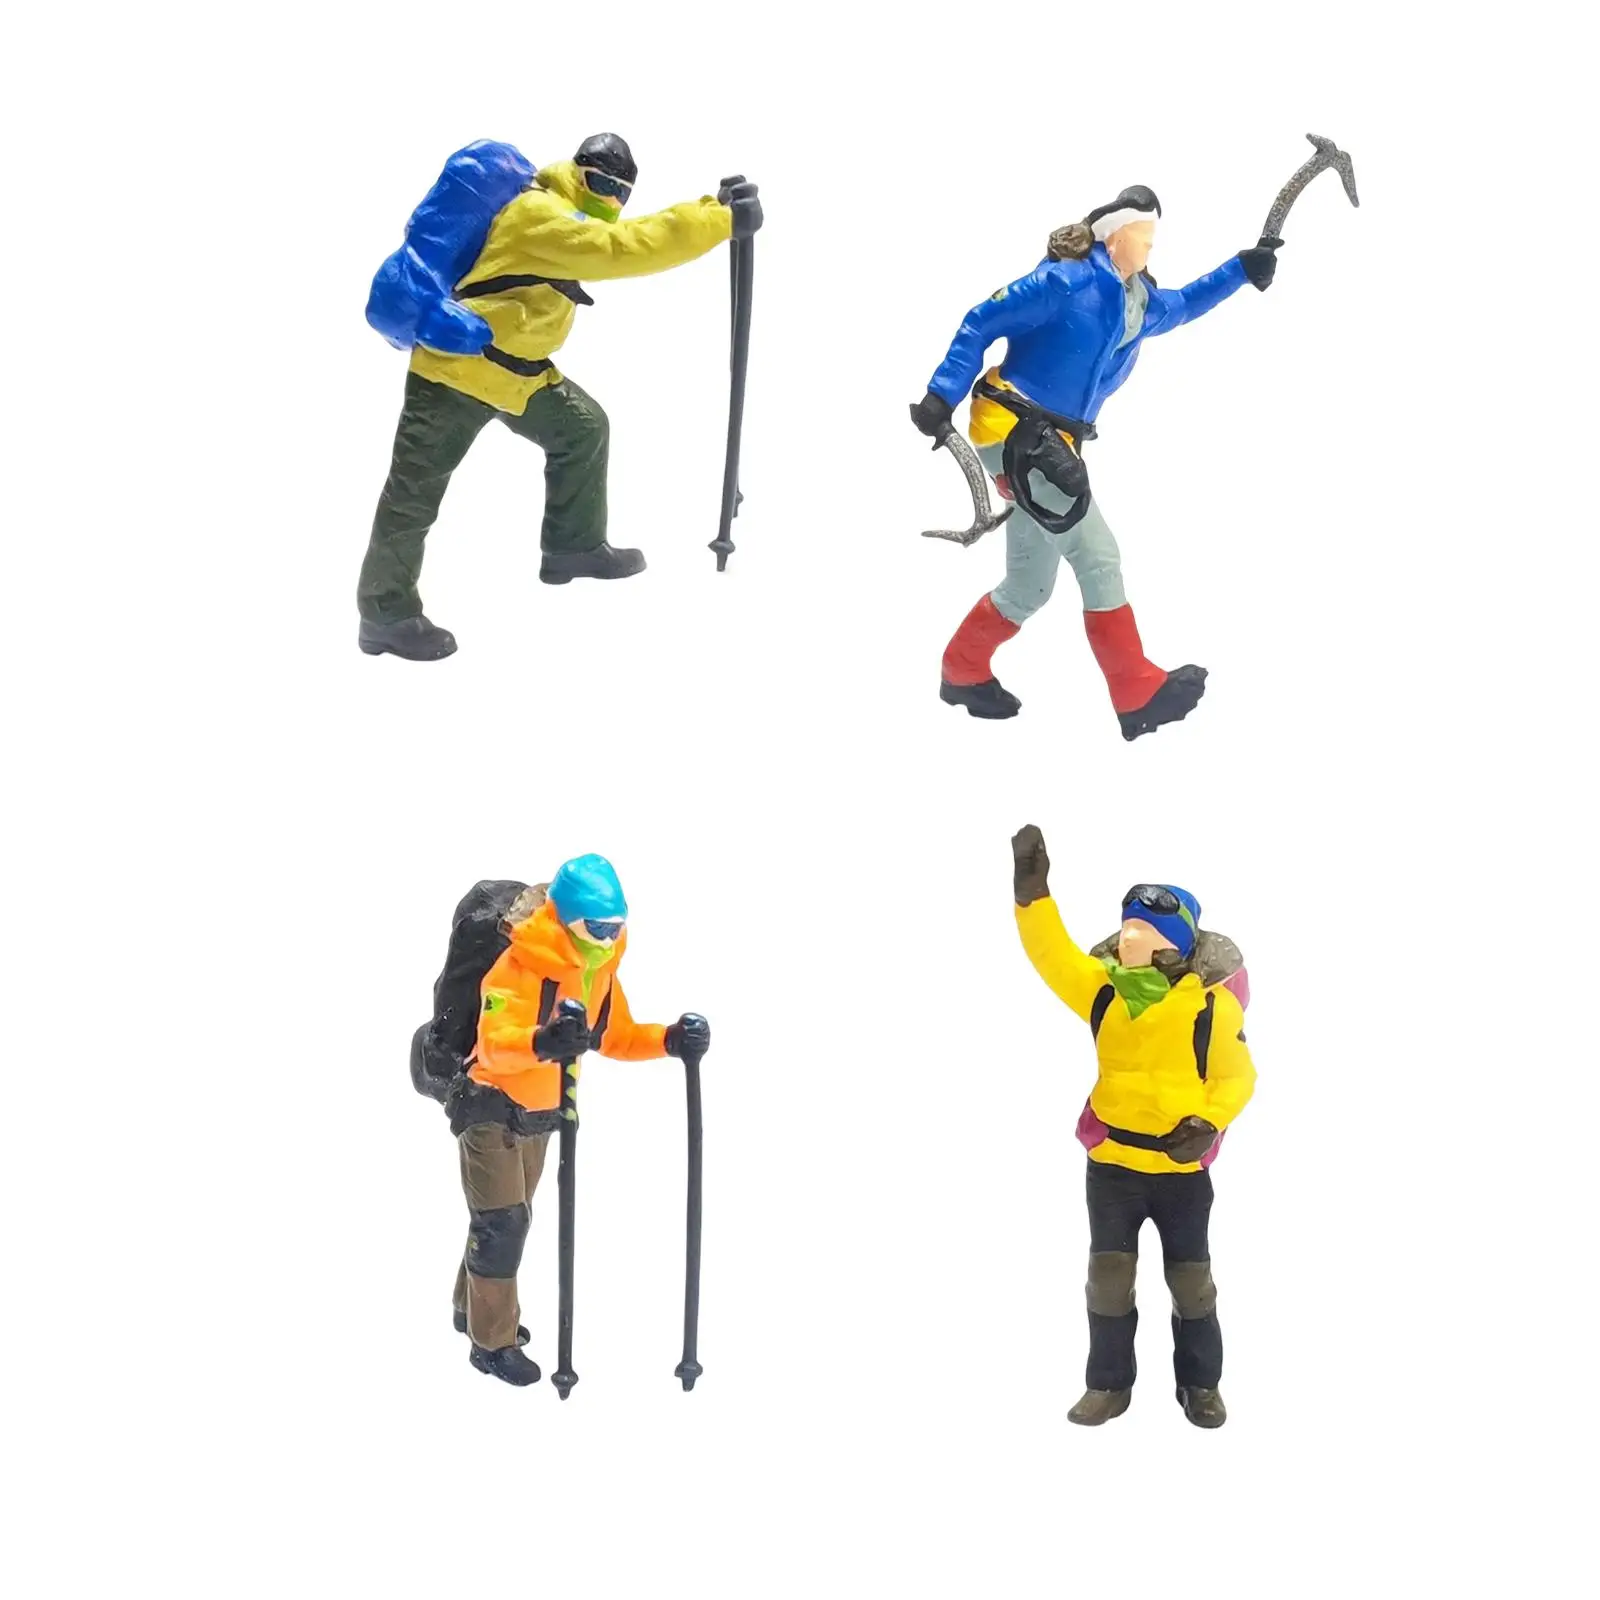 Resin 1/87 Climbing People Figures Mini People Model Mountaineering People Figures for DIY Projects Miniature Scene Layout Decor